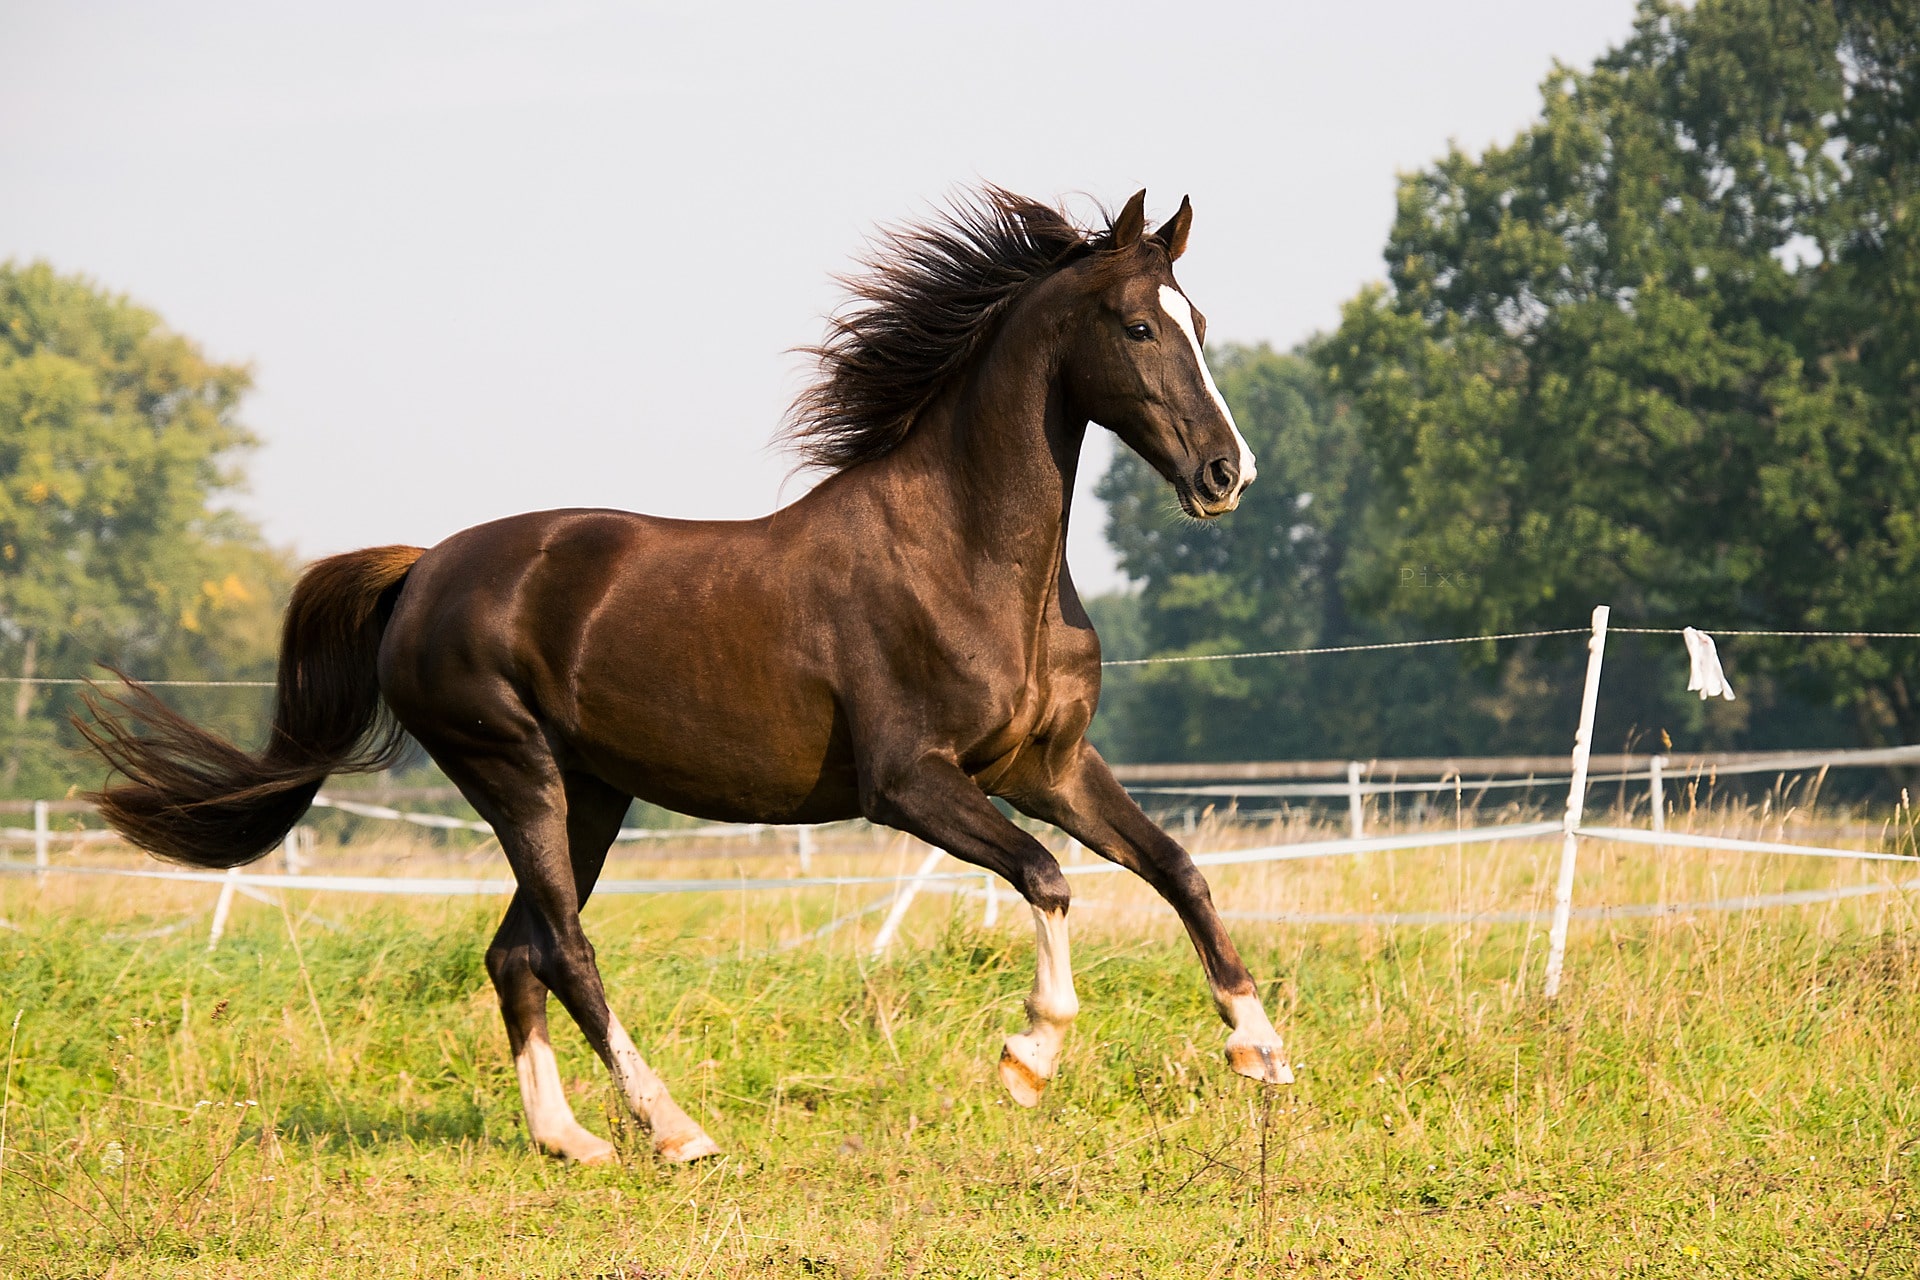 Choose the Horse Medical Insurance Policy